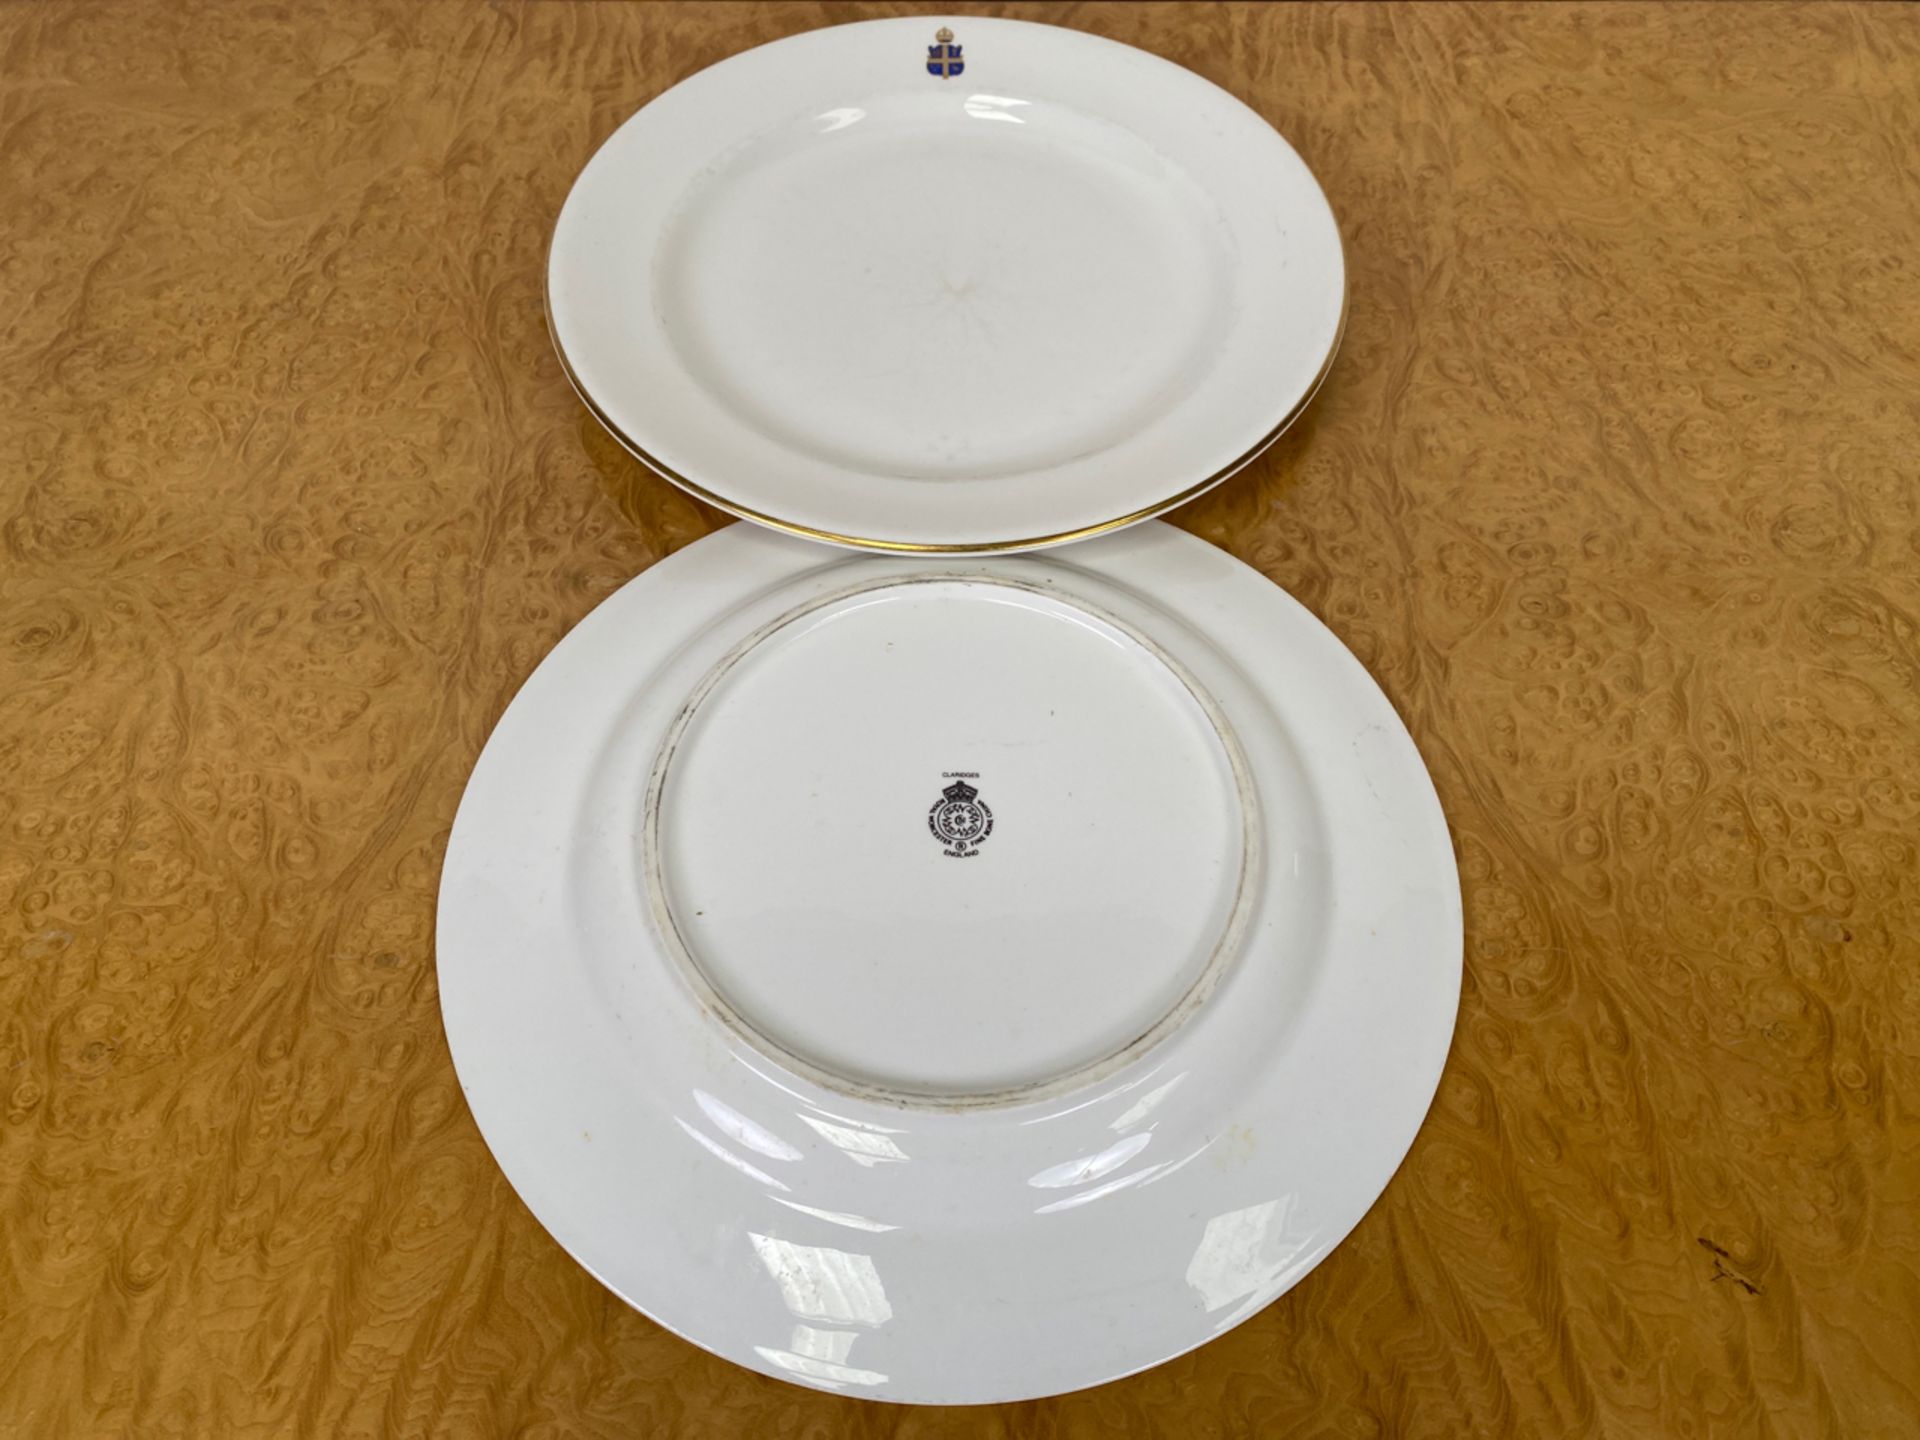 Set of Crested Crockery for Claridge's by Chommette 1884 - Image 29 of 38